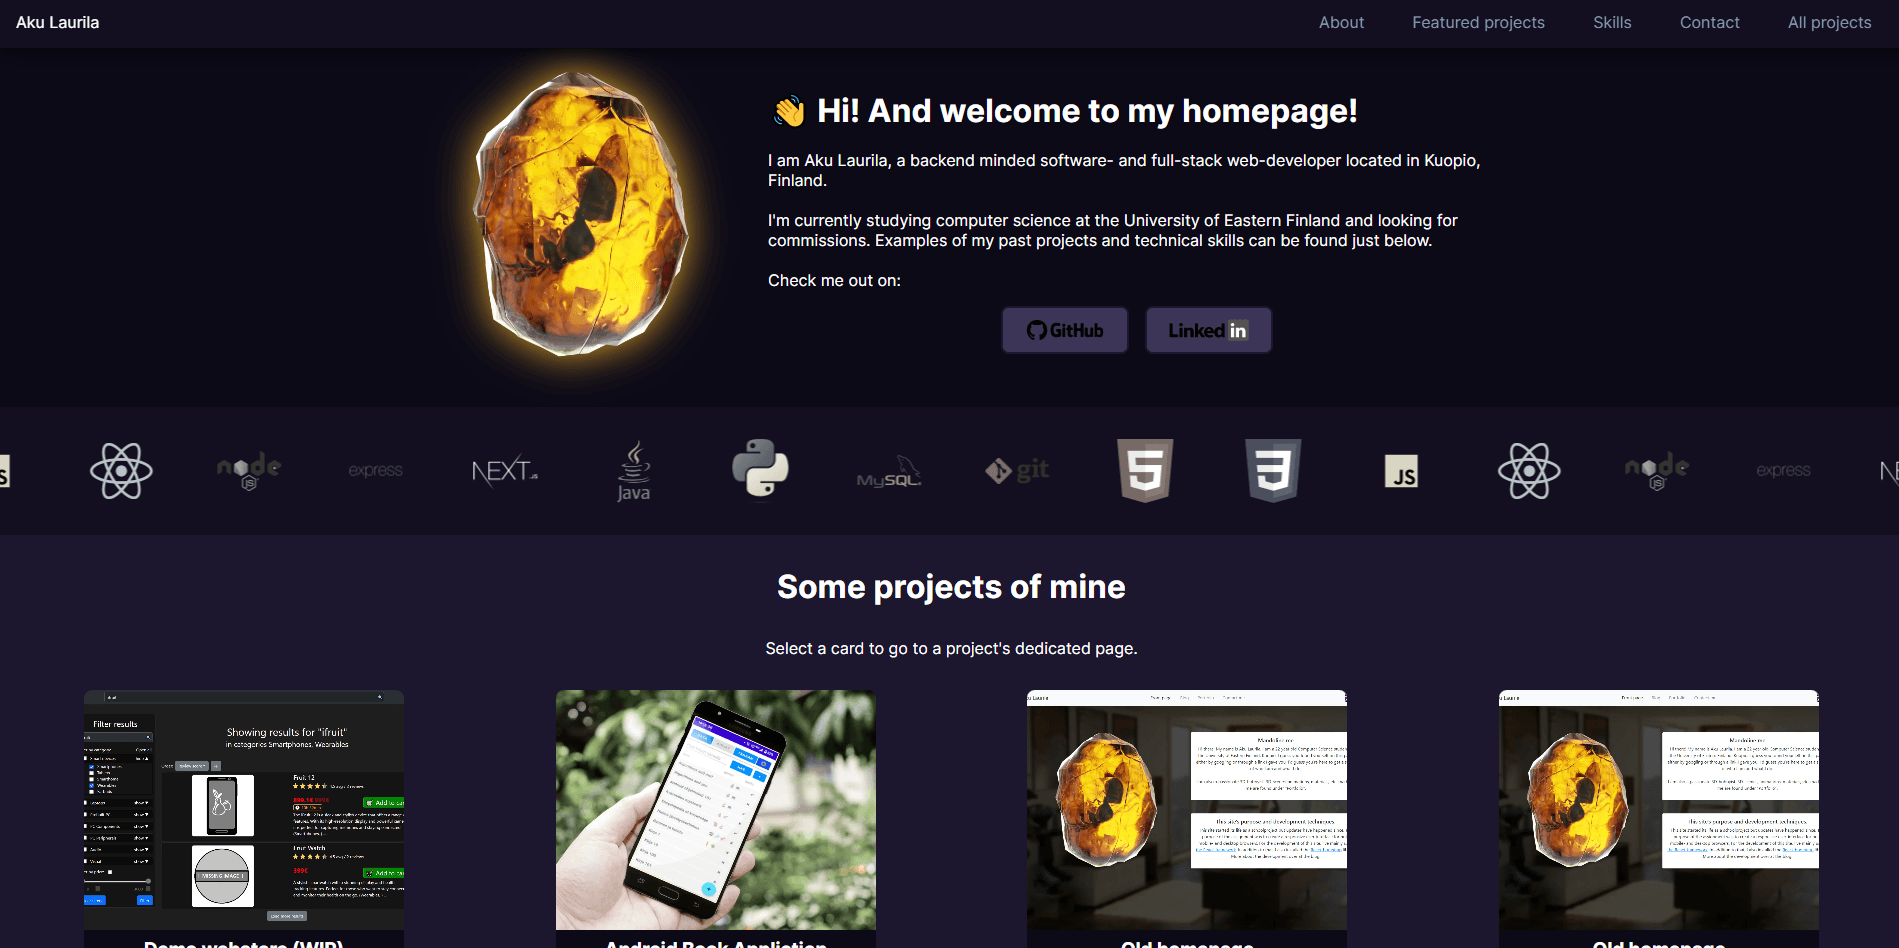 Project preview image